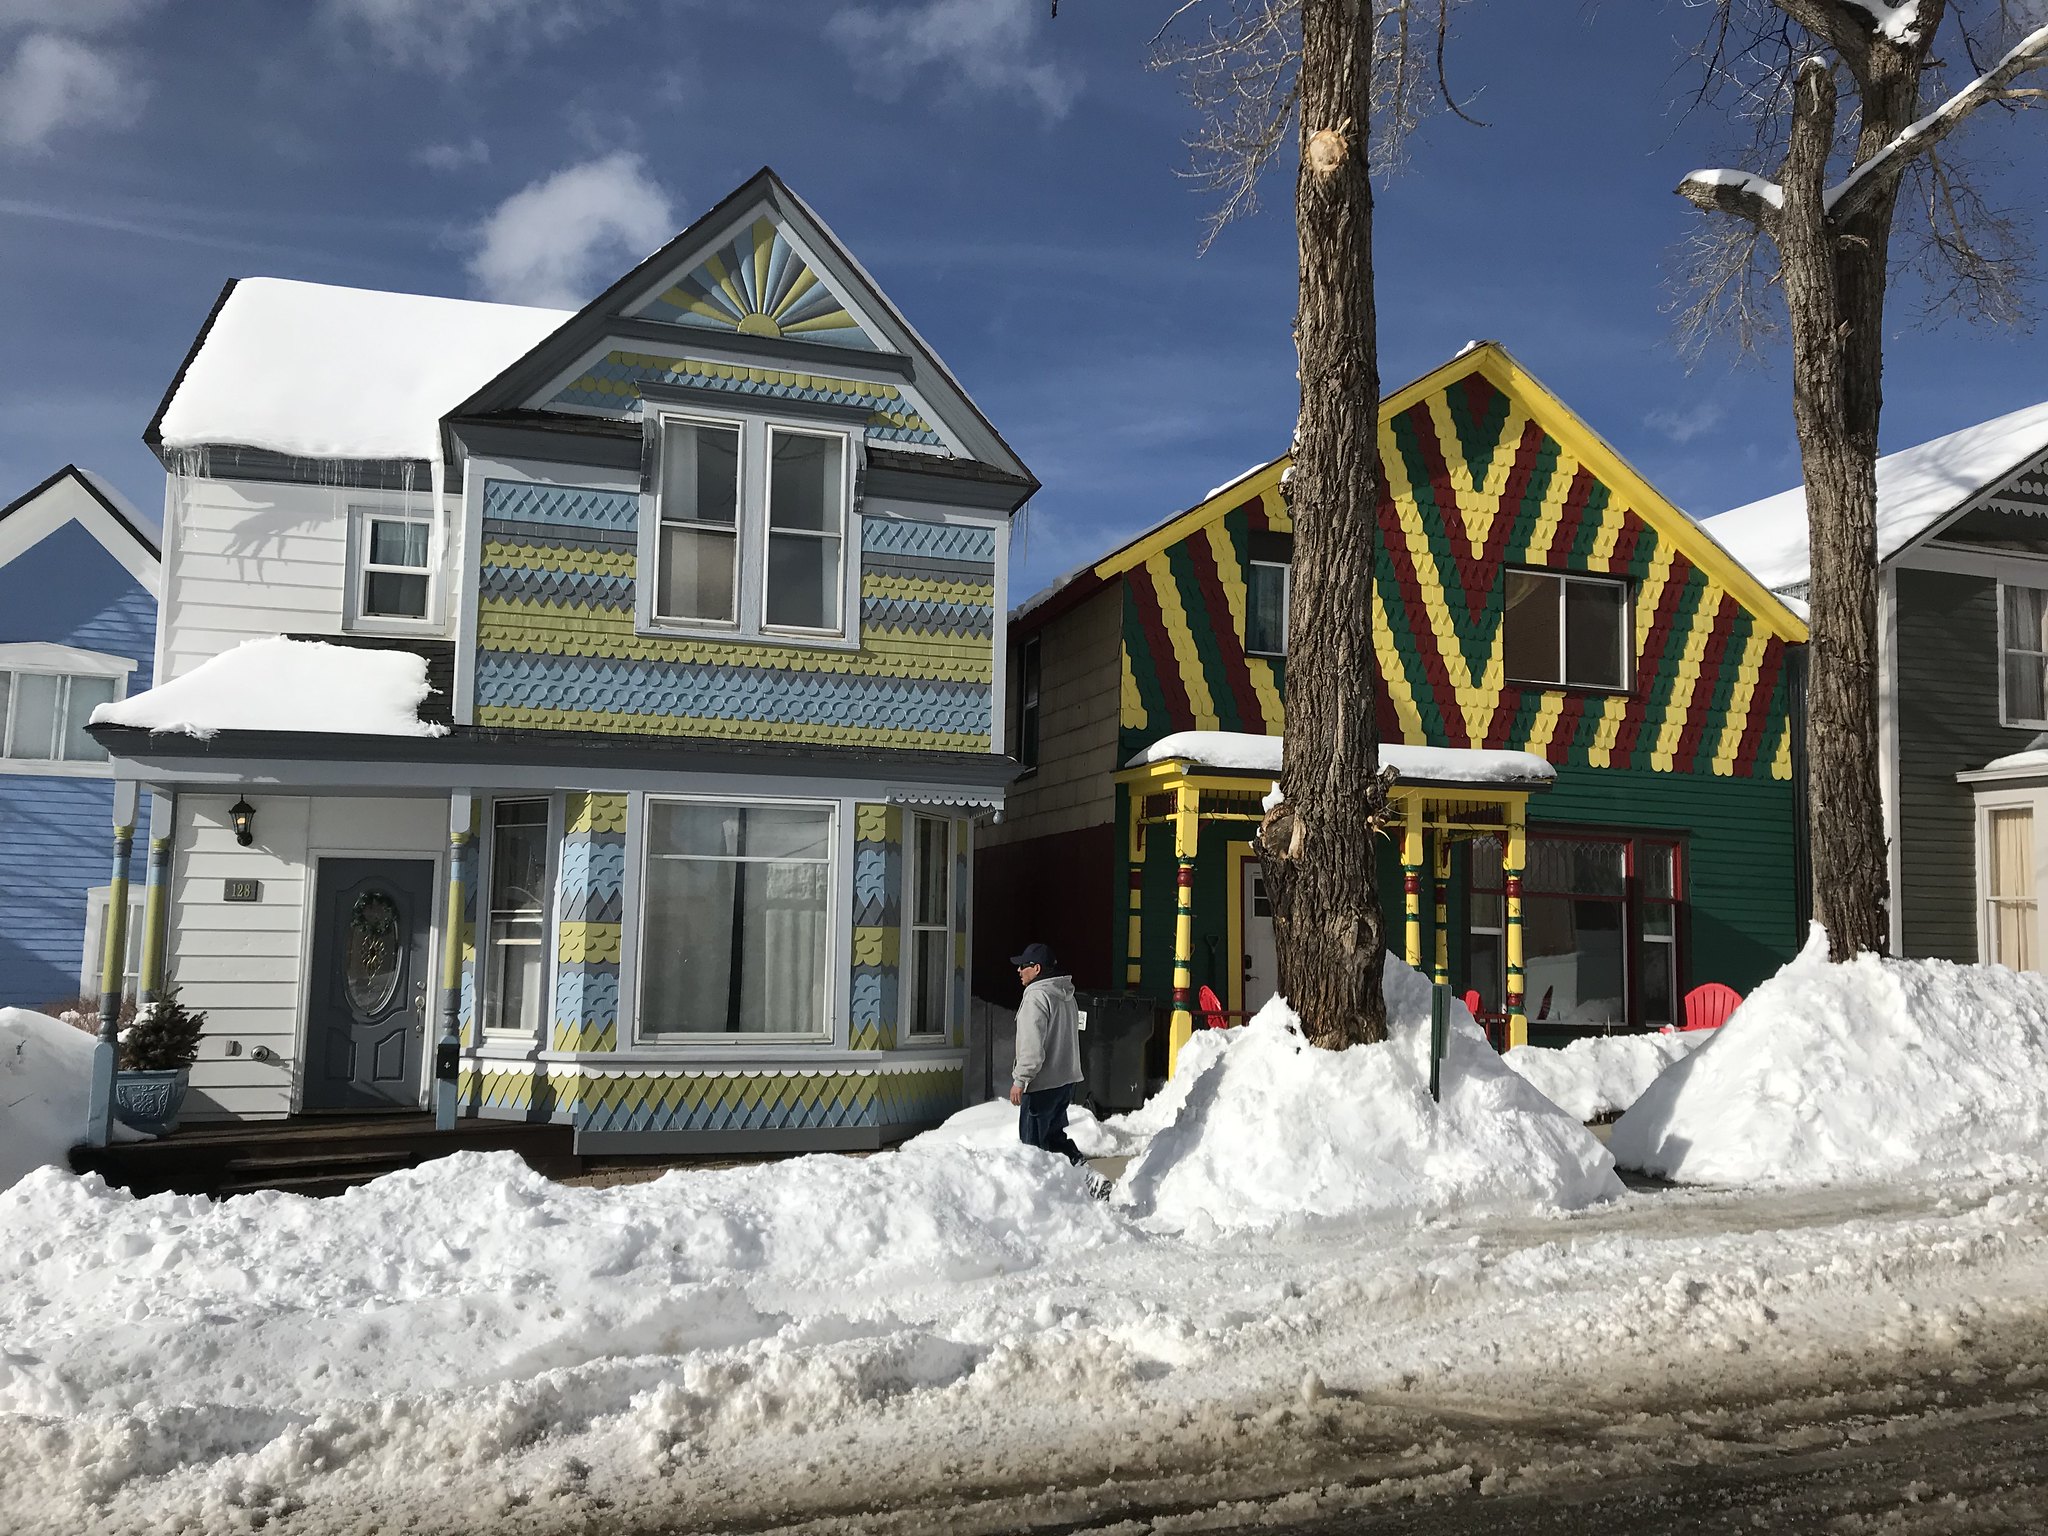 Two colourful houses on a snowy street